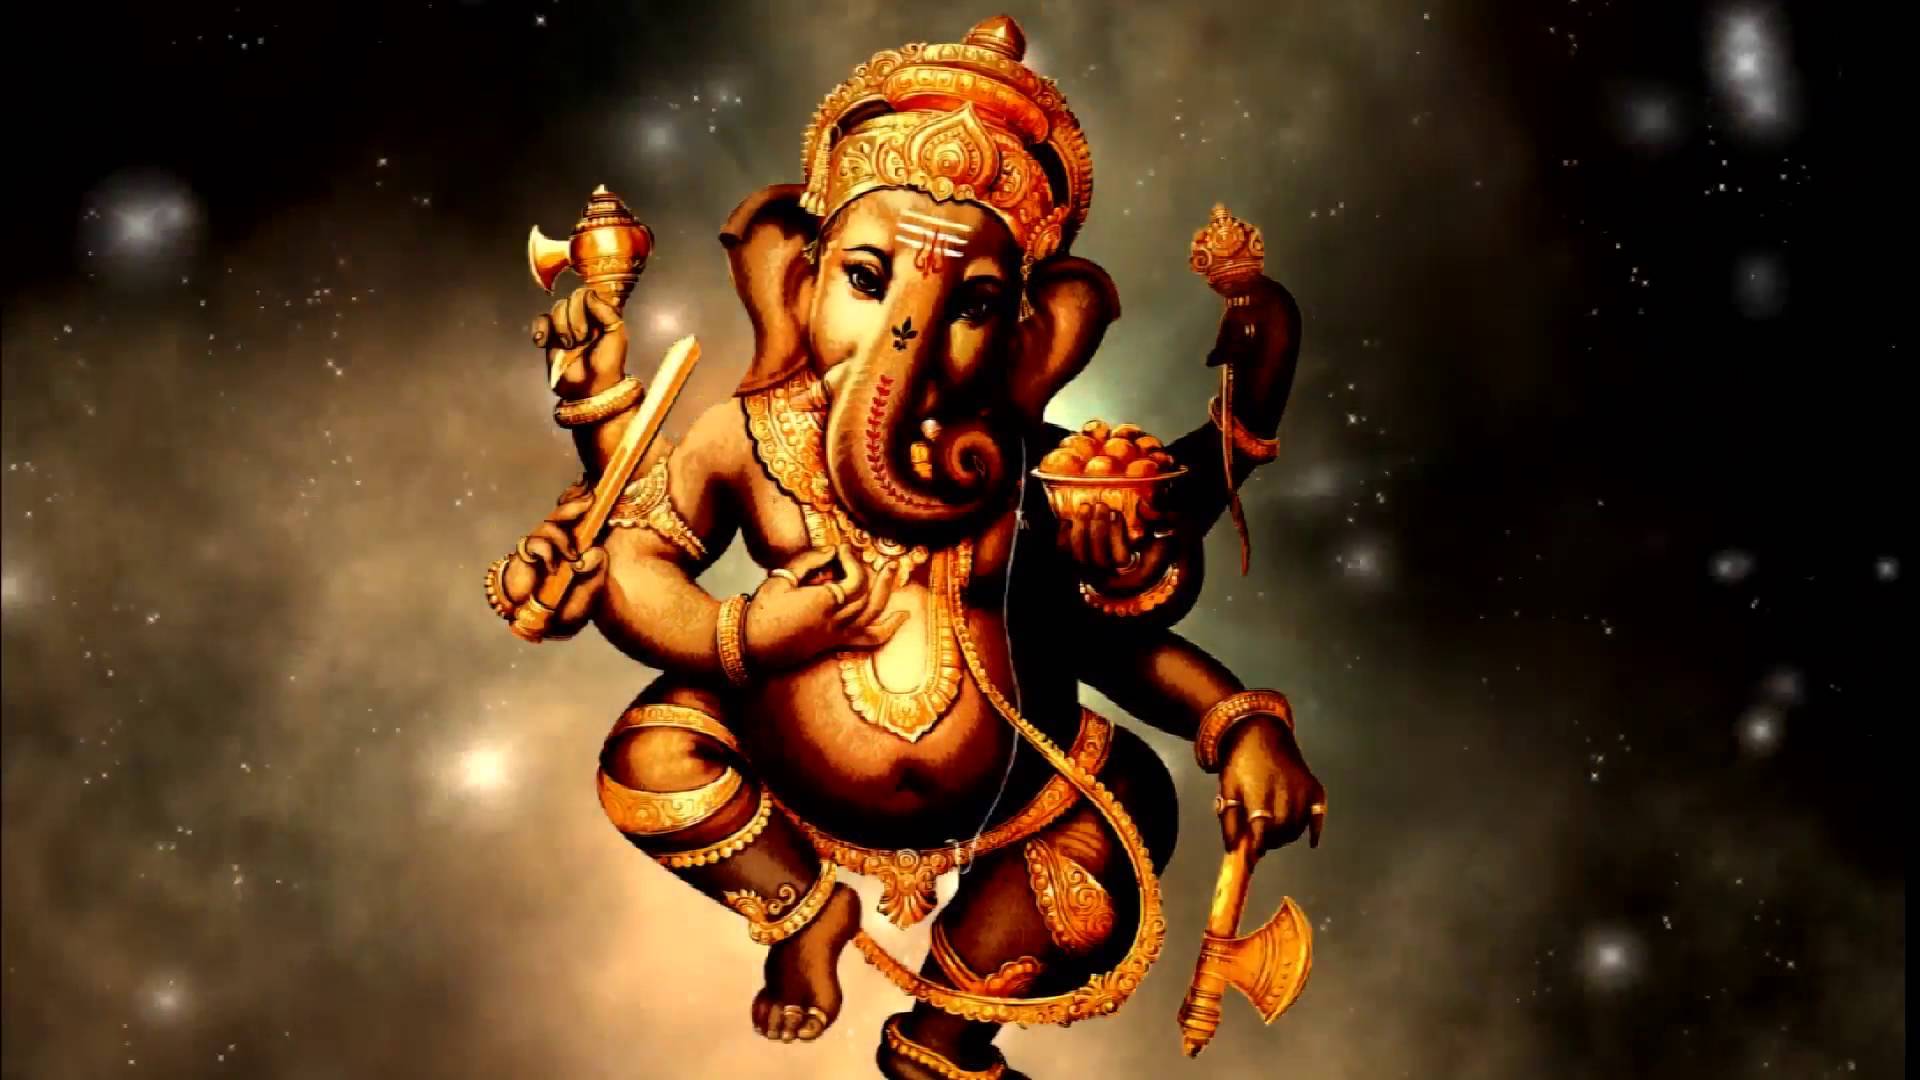 Amoled Indian Gods Wallpapers - Wallpaper Cave